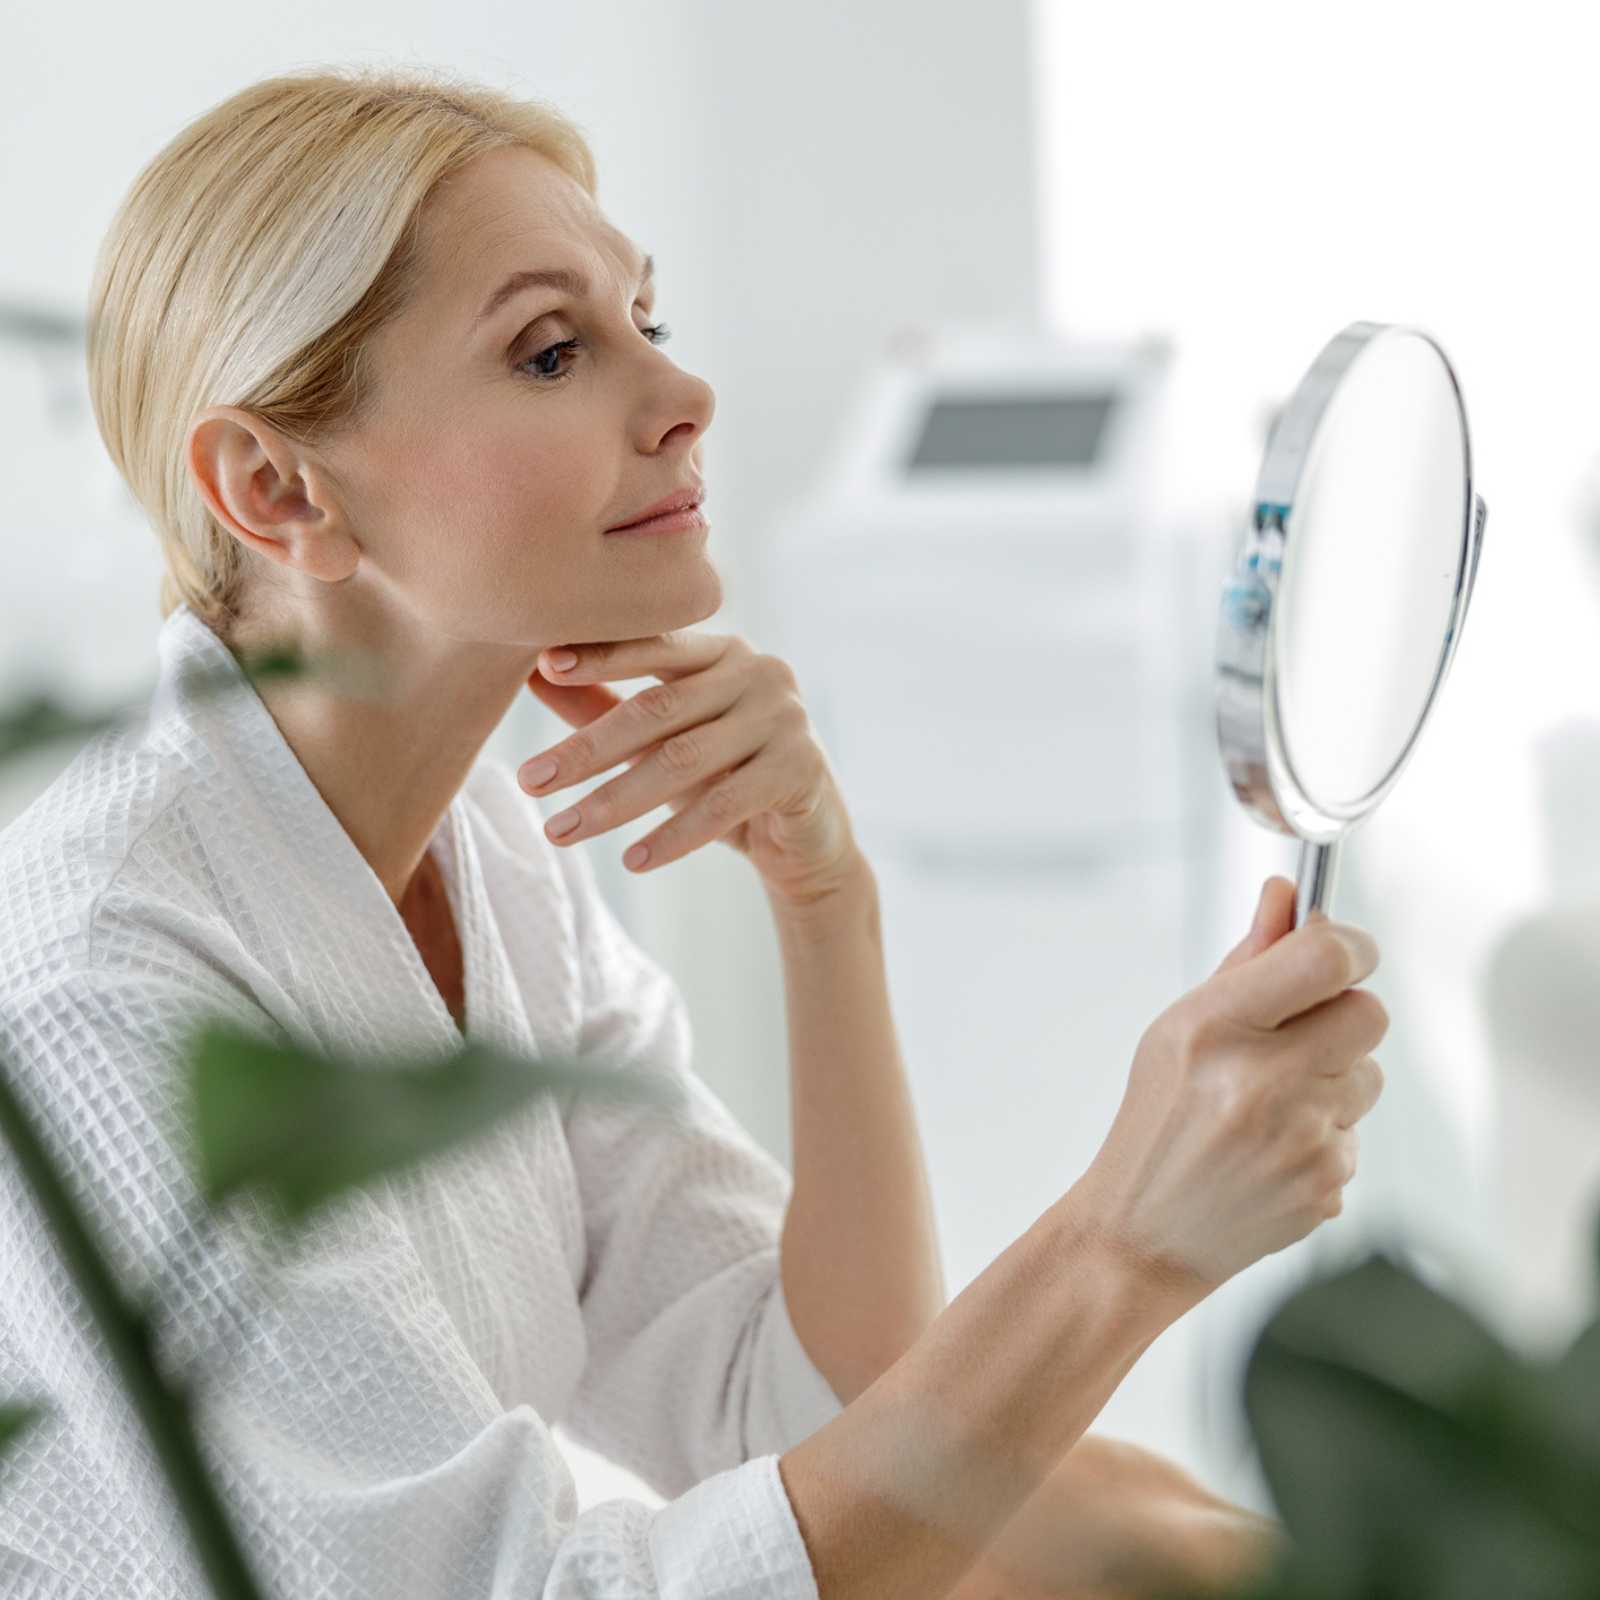 woman looking at herself in a handheld mirror